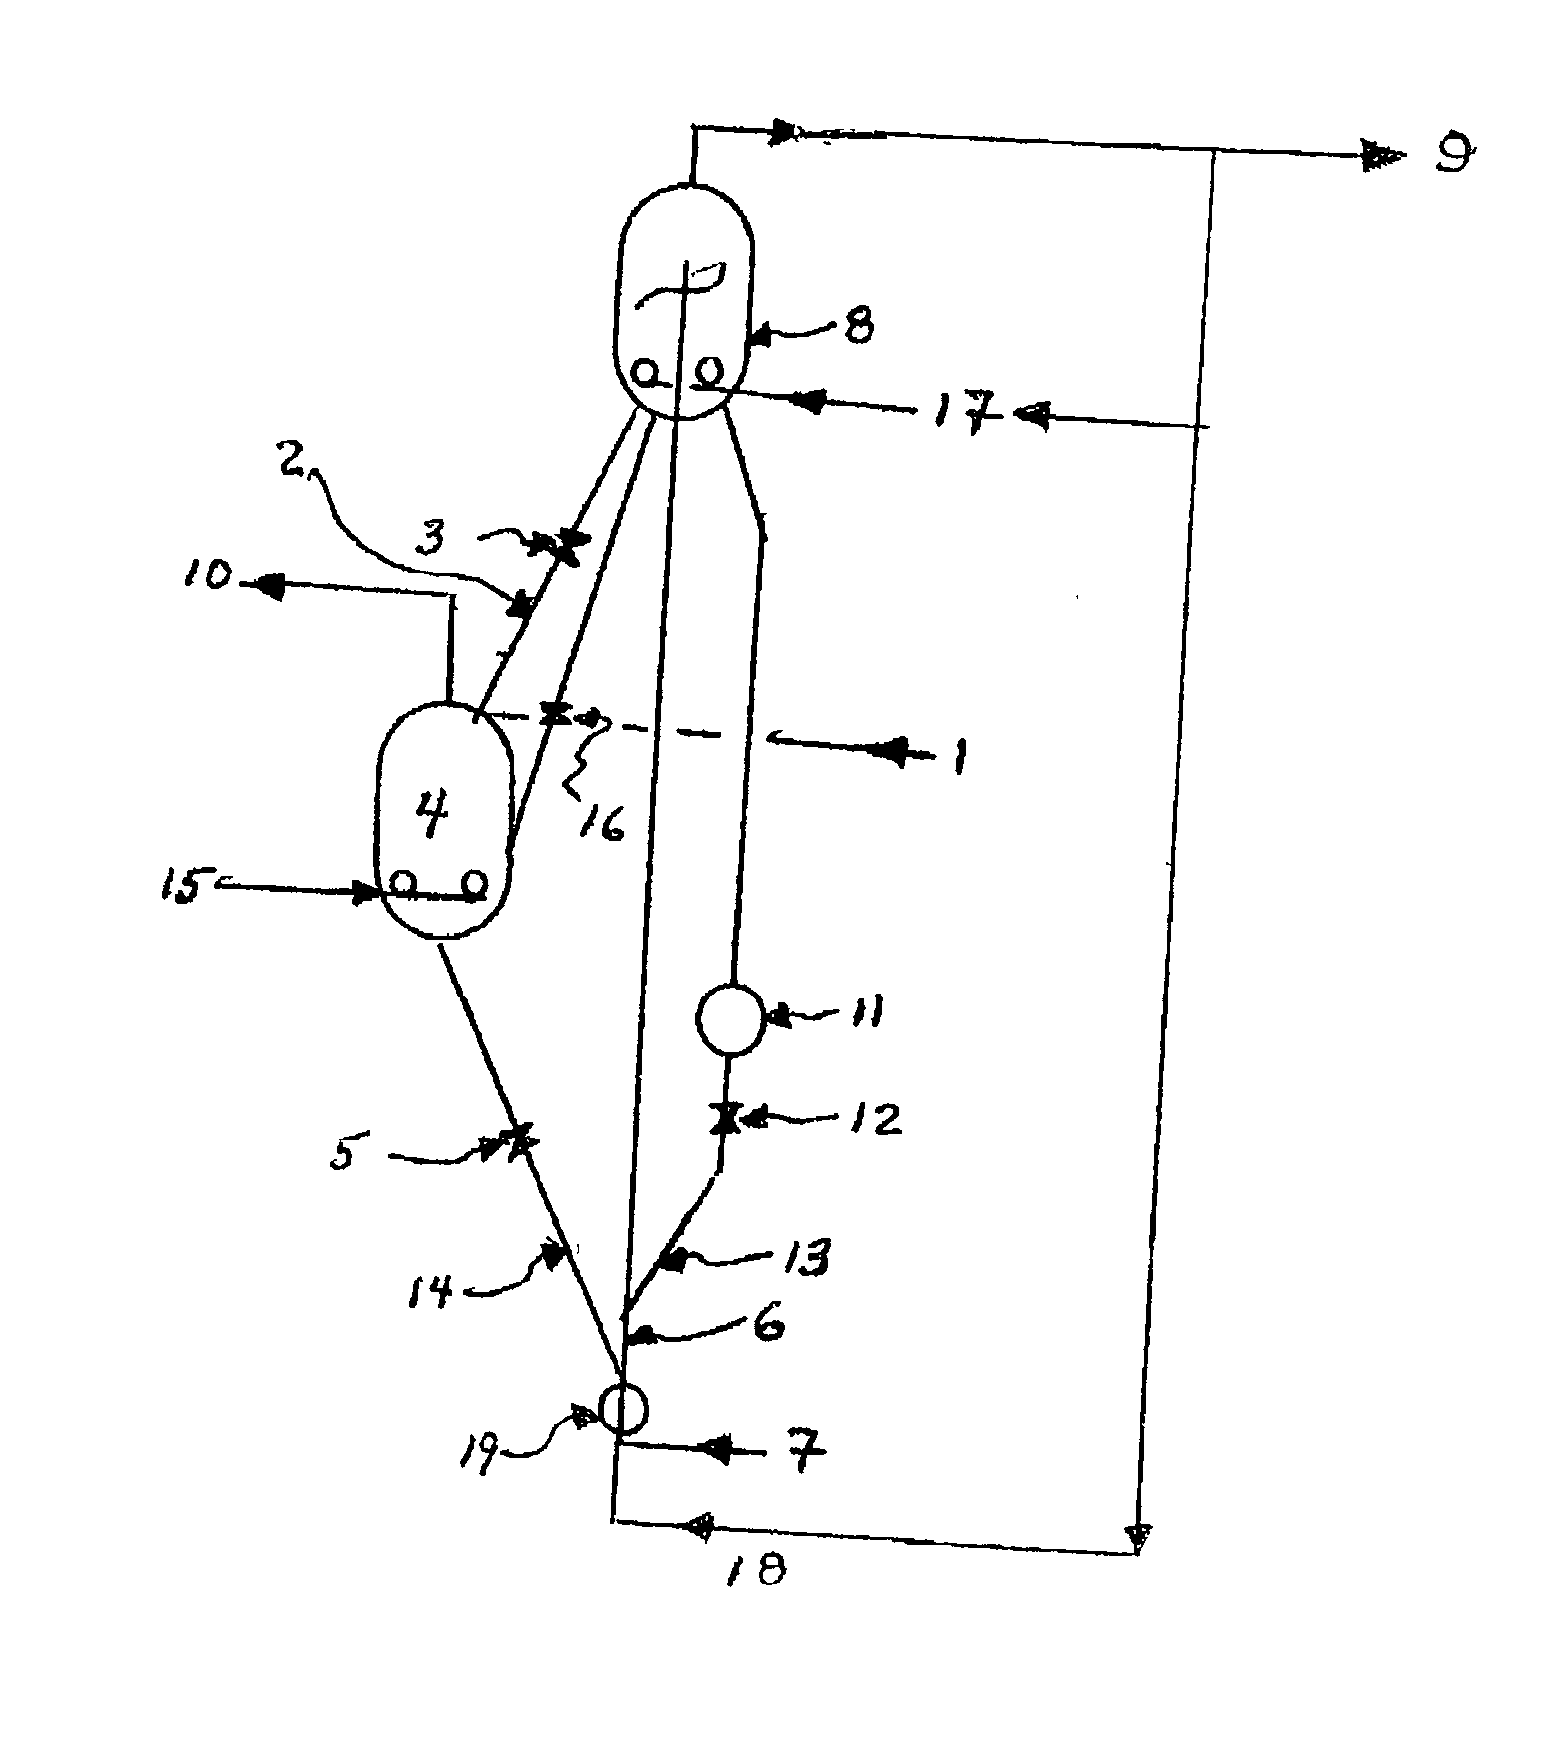 Process for controlling oxidation of nitrogen and metals in circulating fluidized solids contacting process